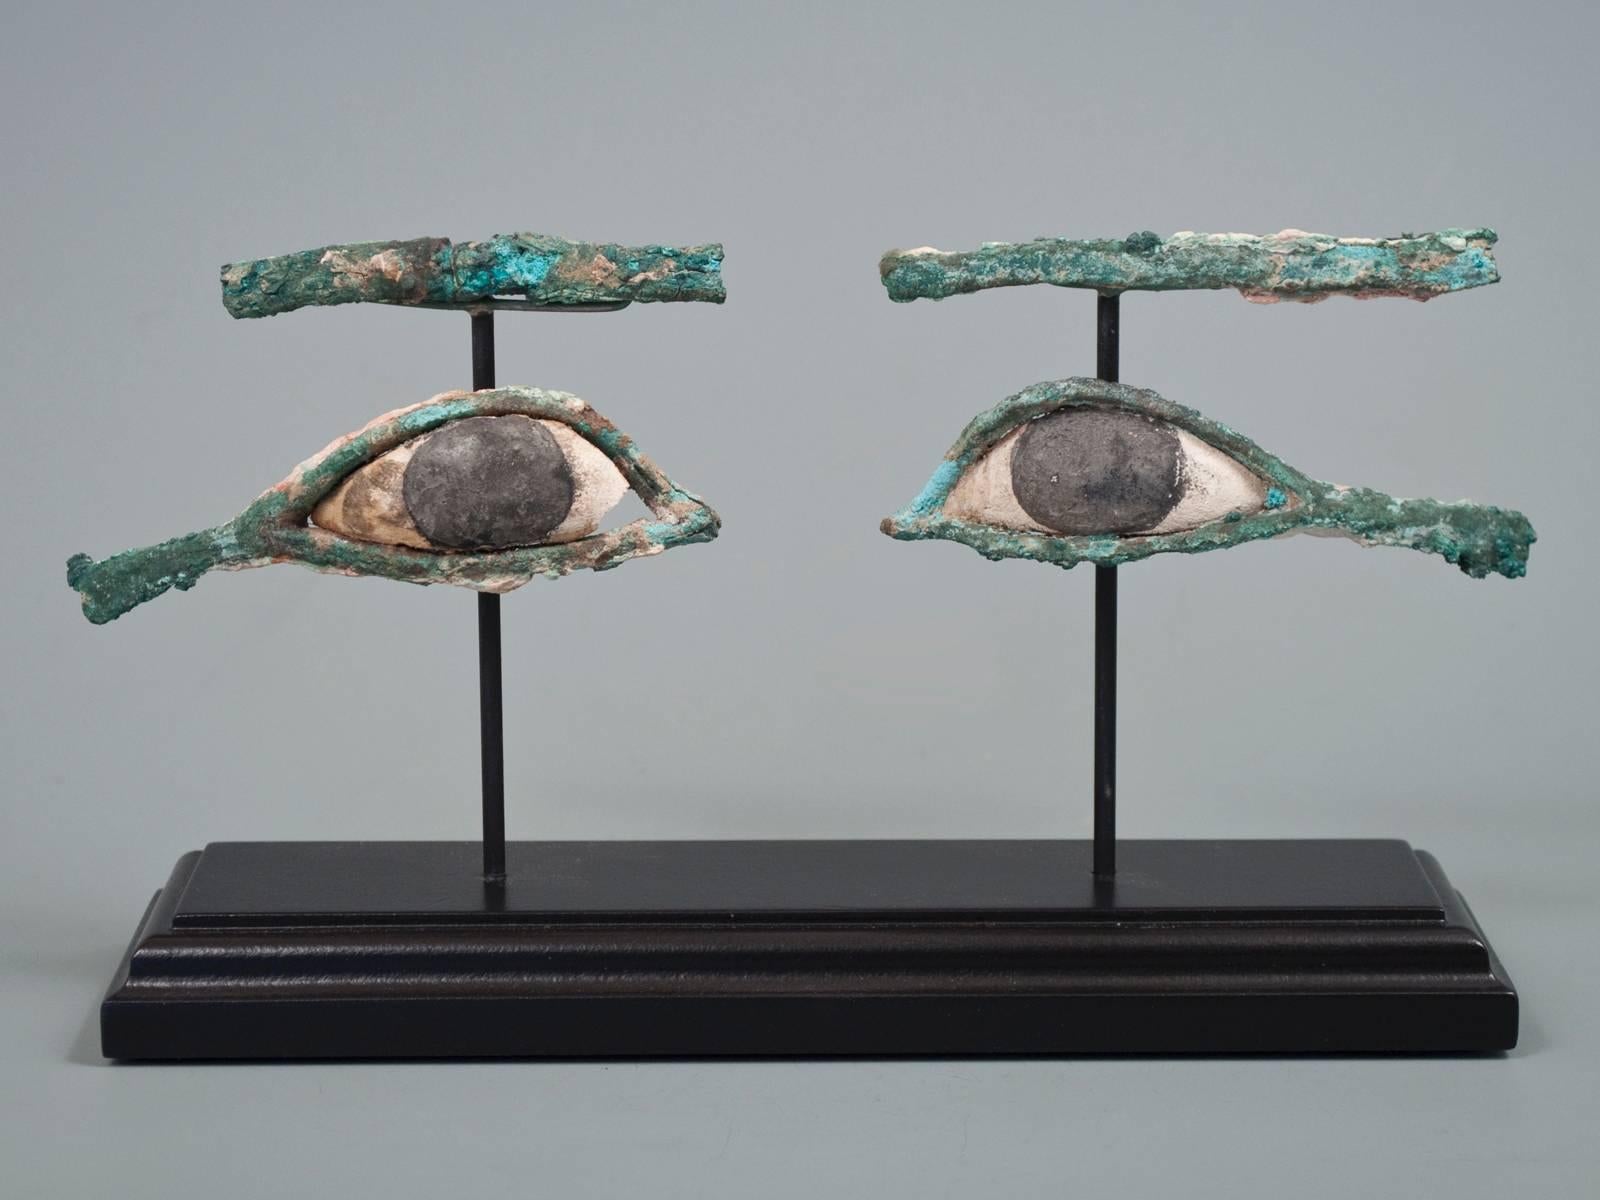 Offered by Zena Kruzick.
Ancient Egyptian bronze and limestone eyes from a wooden sarcophagus.
8.75